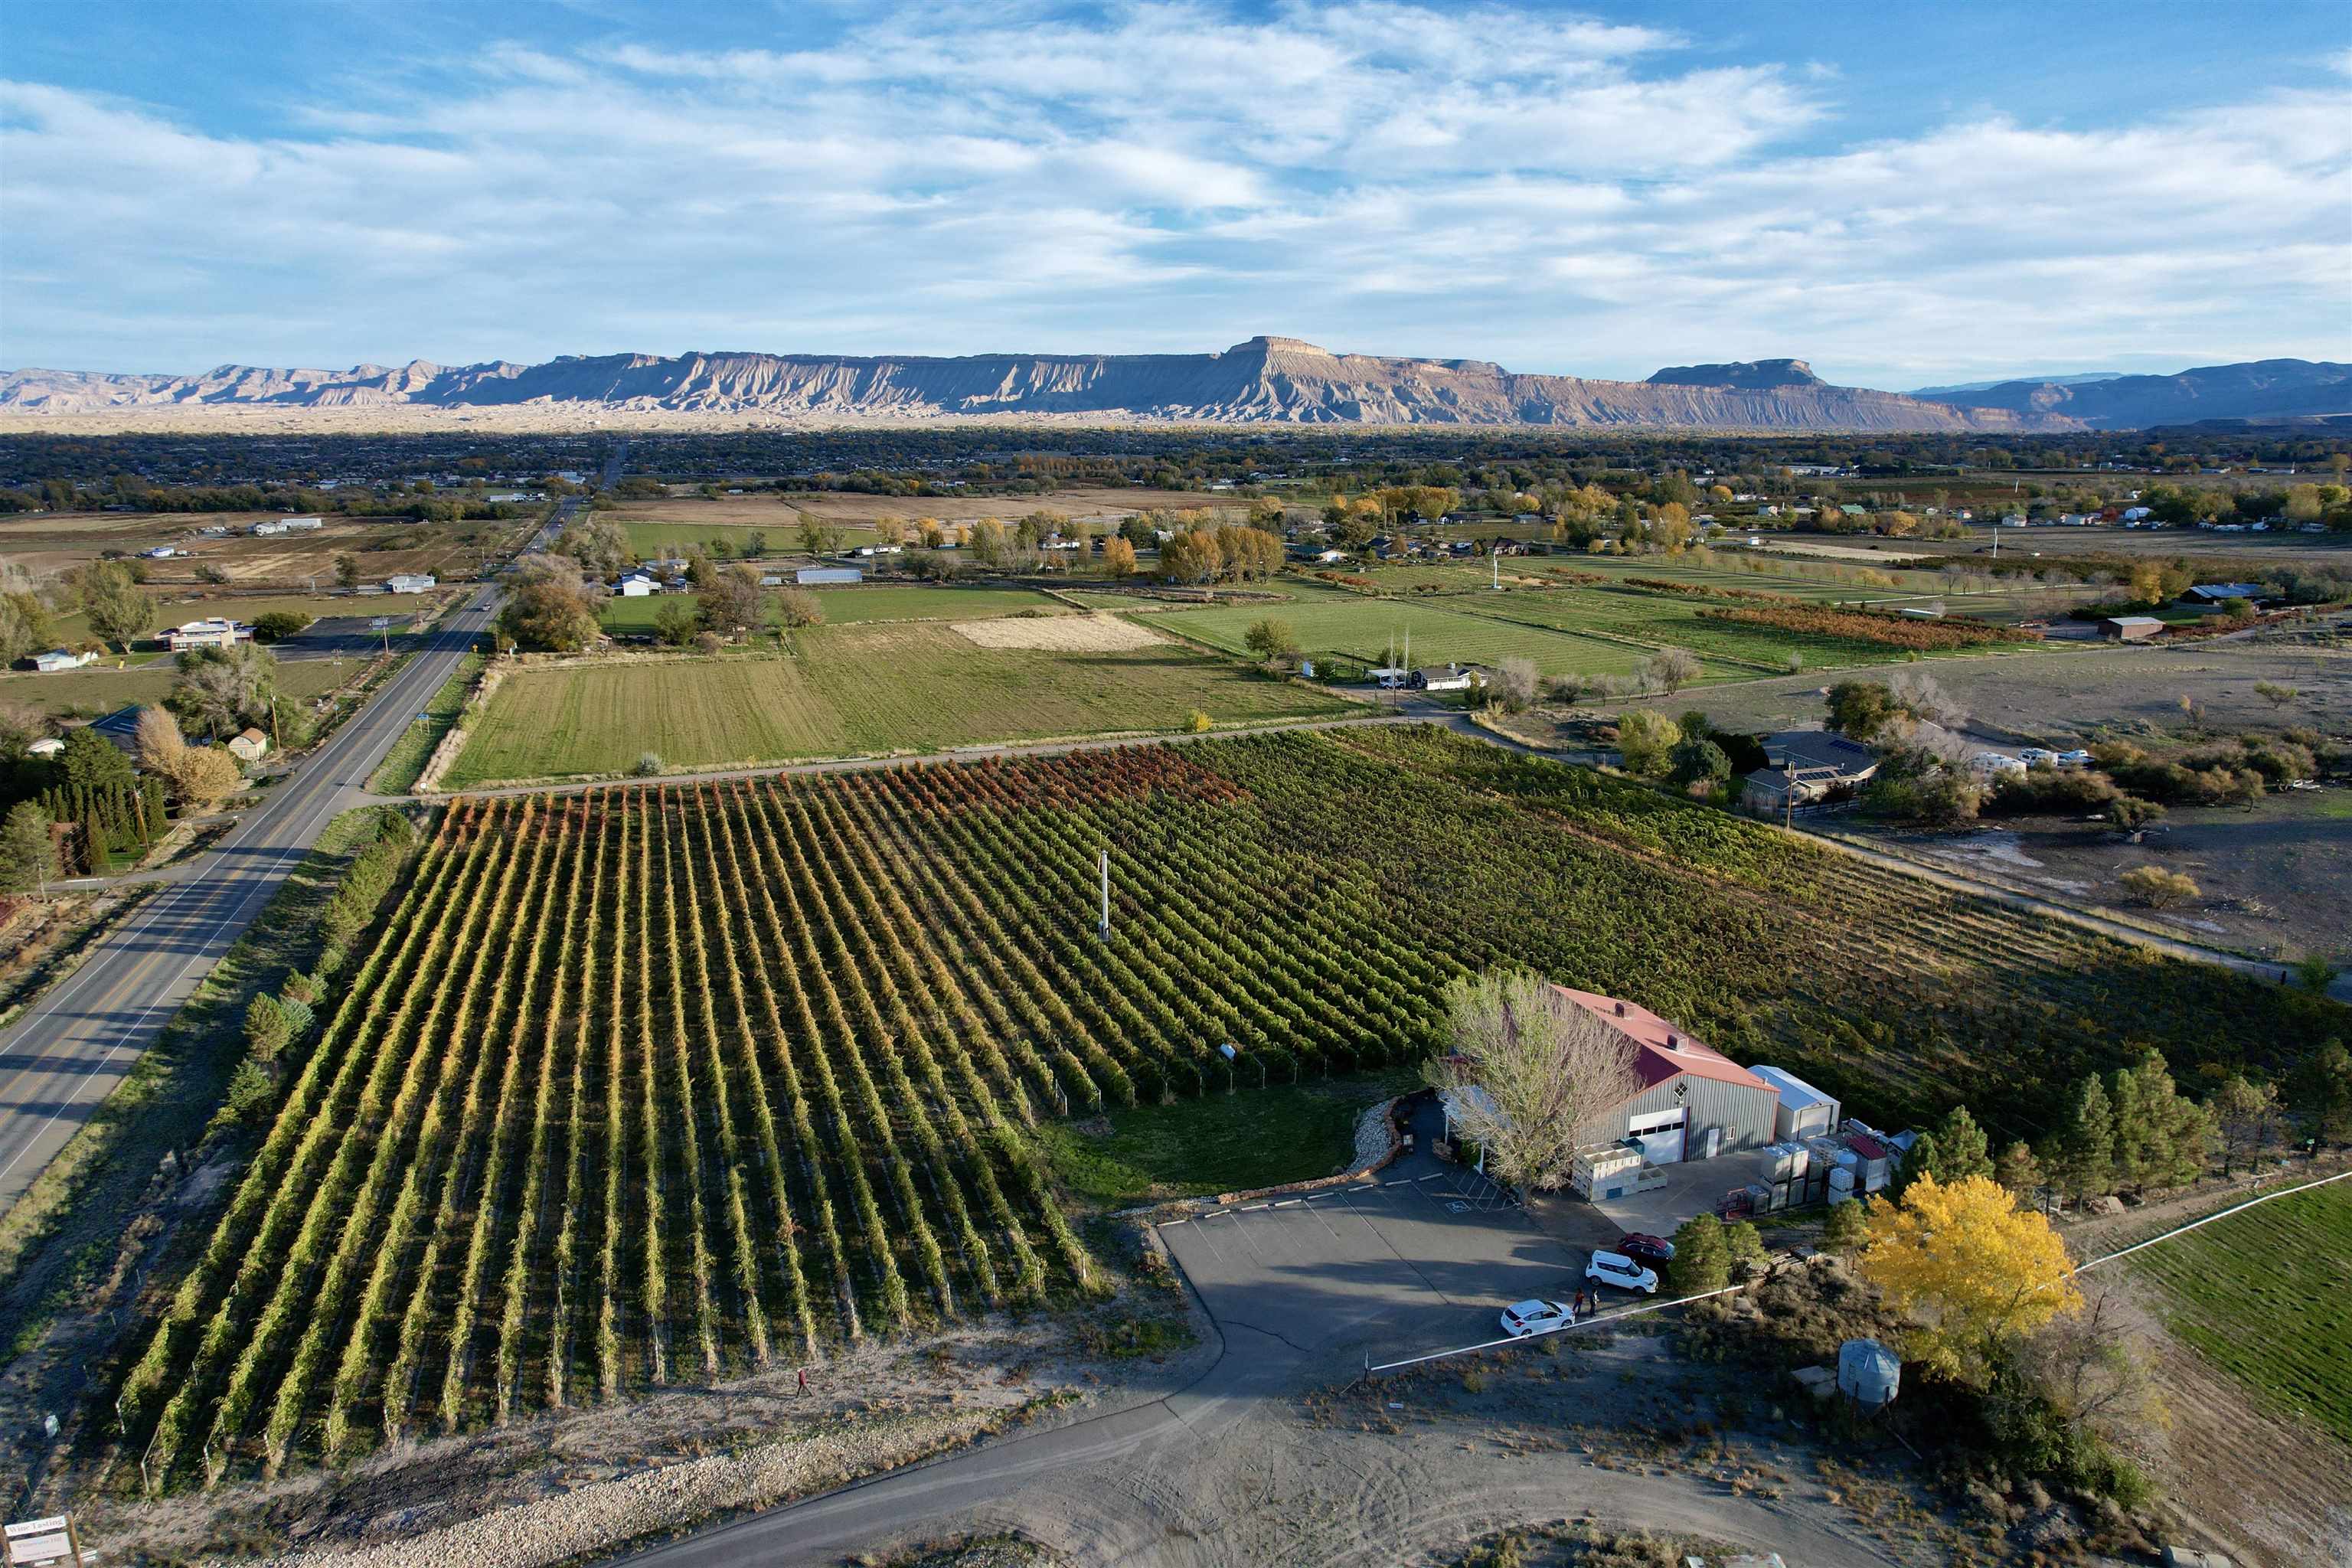 220 32 Road, Grand Junction, CO